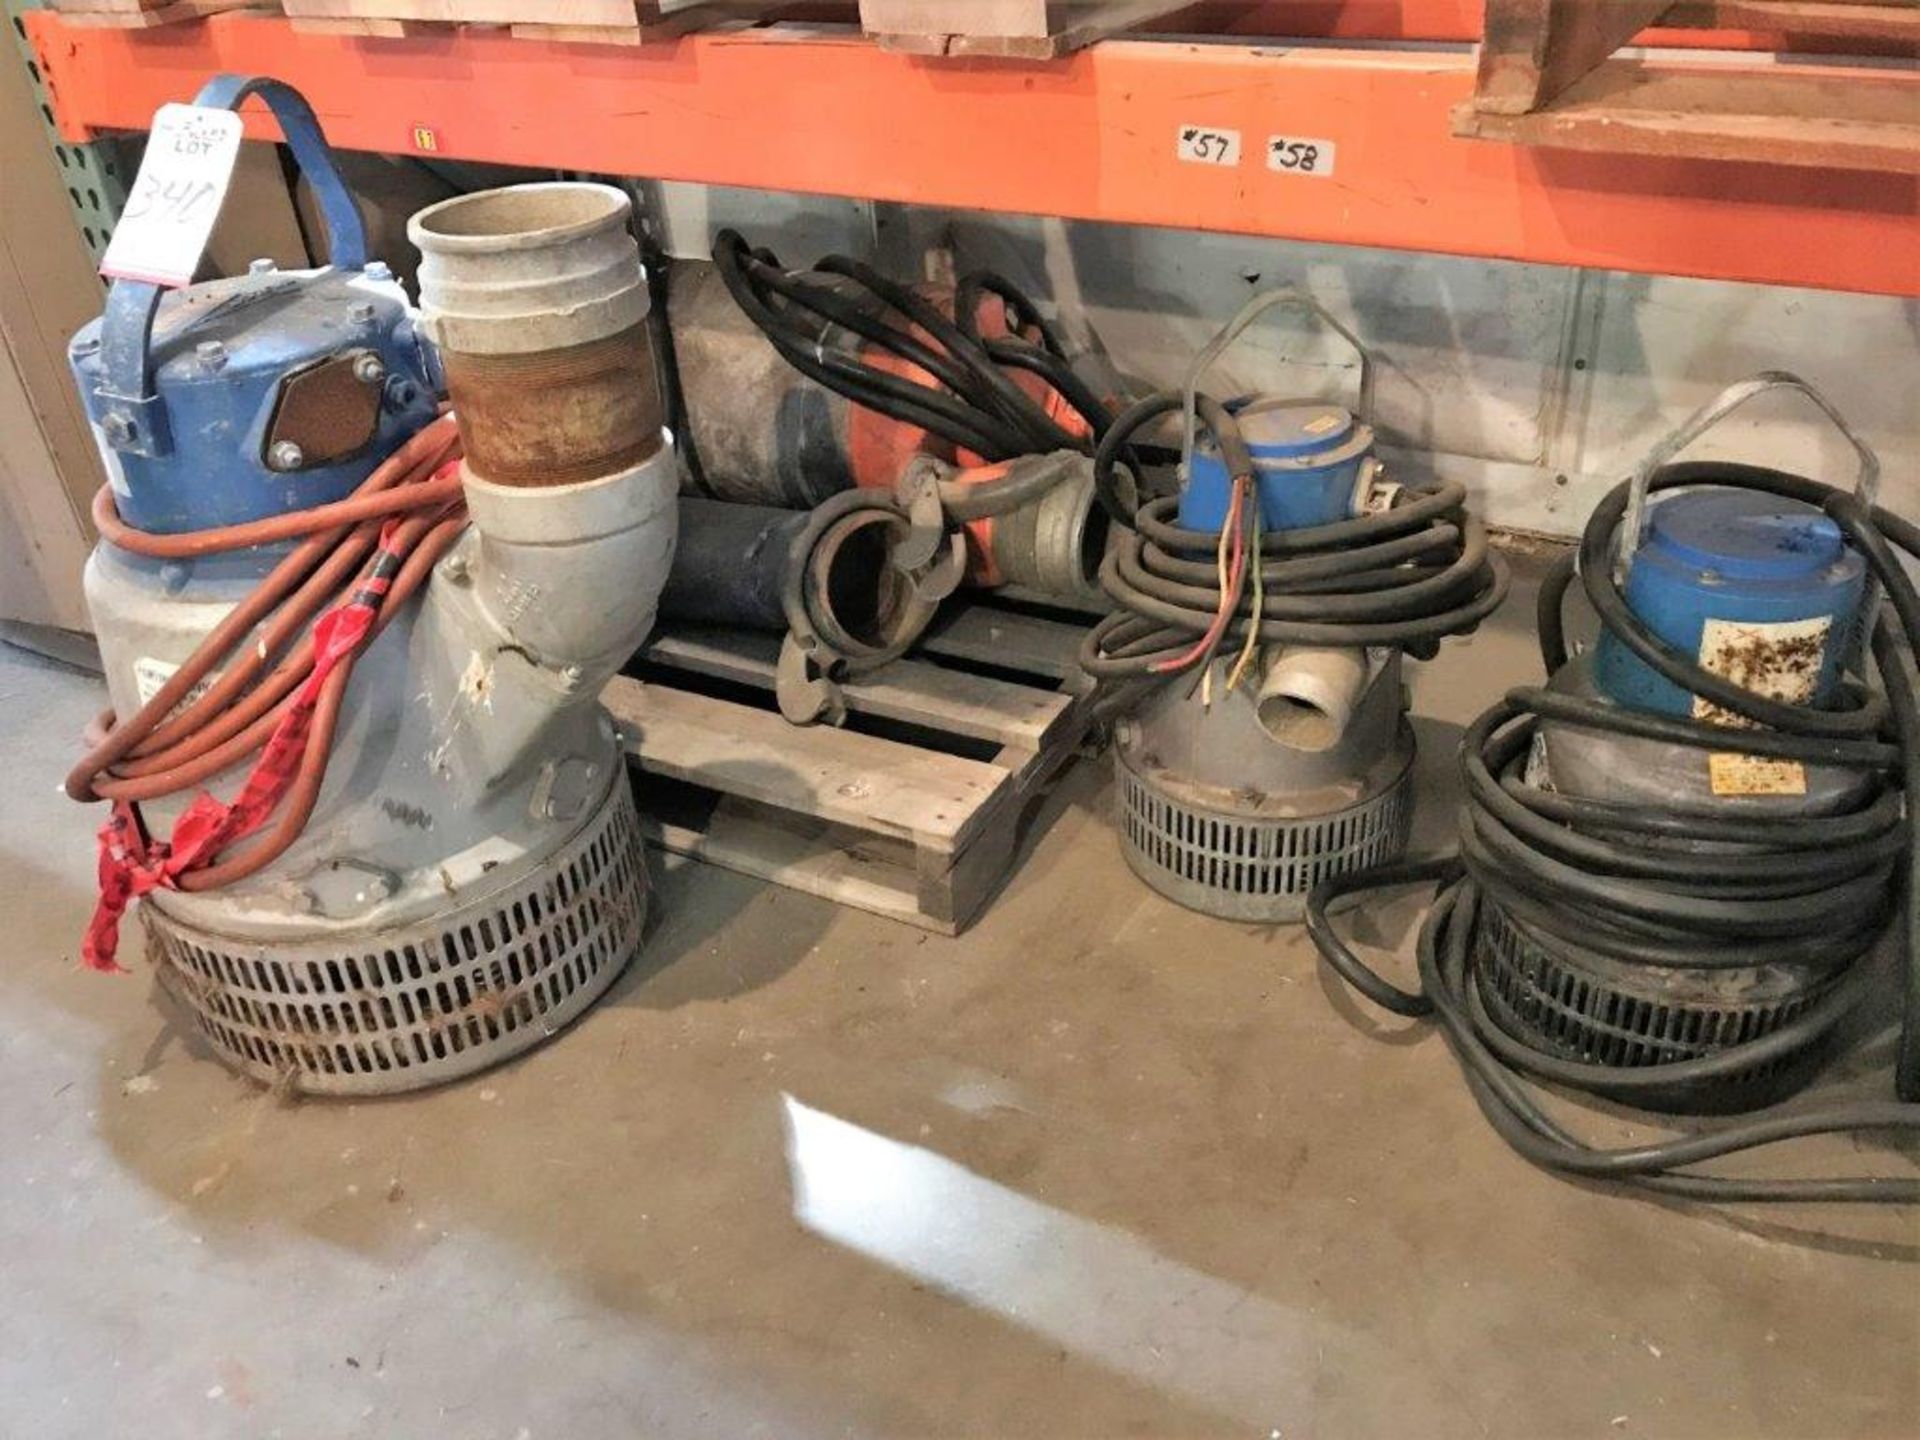 LOT - (4) ASSORTED SUBMERSIBLE PUMPS (CONDITION UNKNOWN)